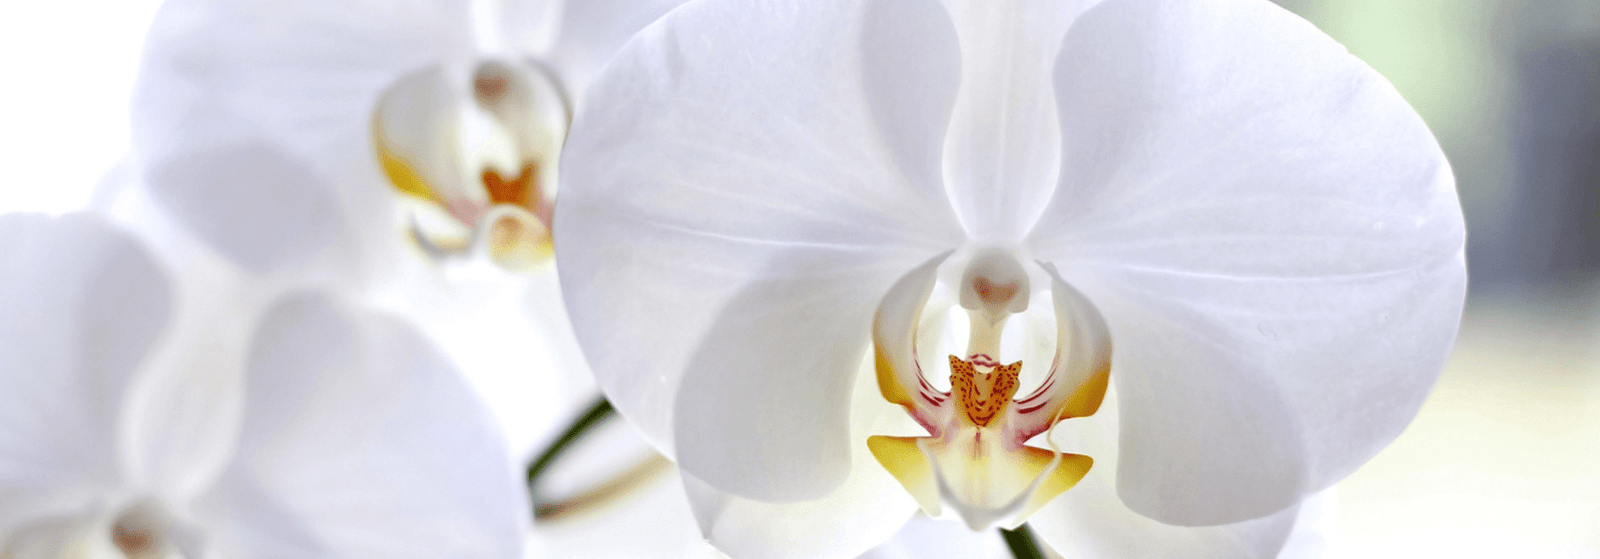 Unique and rare beauty of Orchids